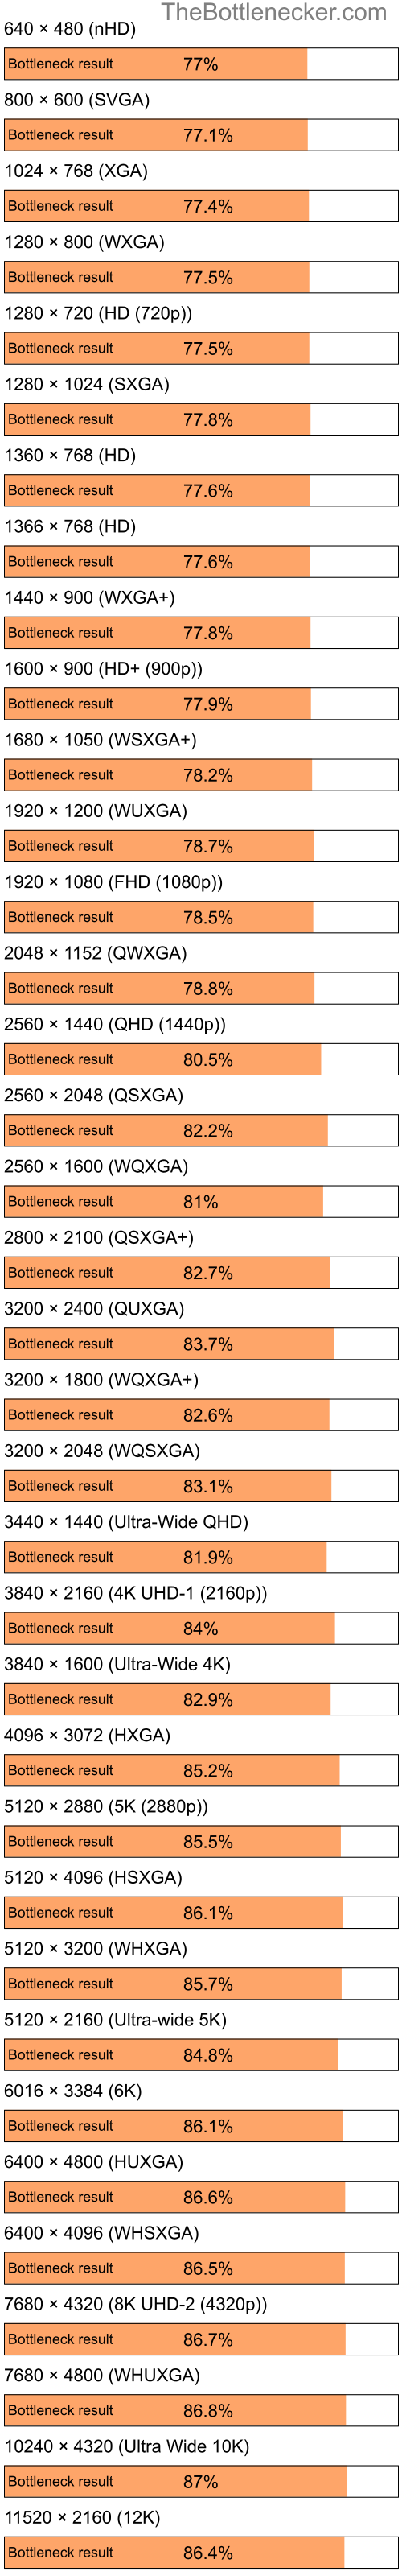 Bottleneck results by resolution for Intel Pentium 4 and AMD Radeon 9550 in General Tasks